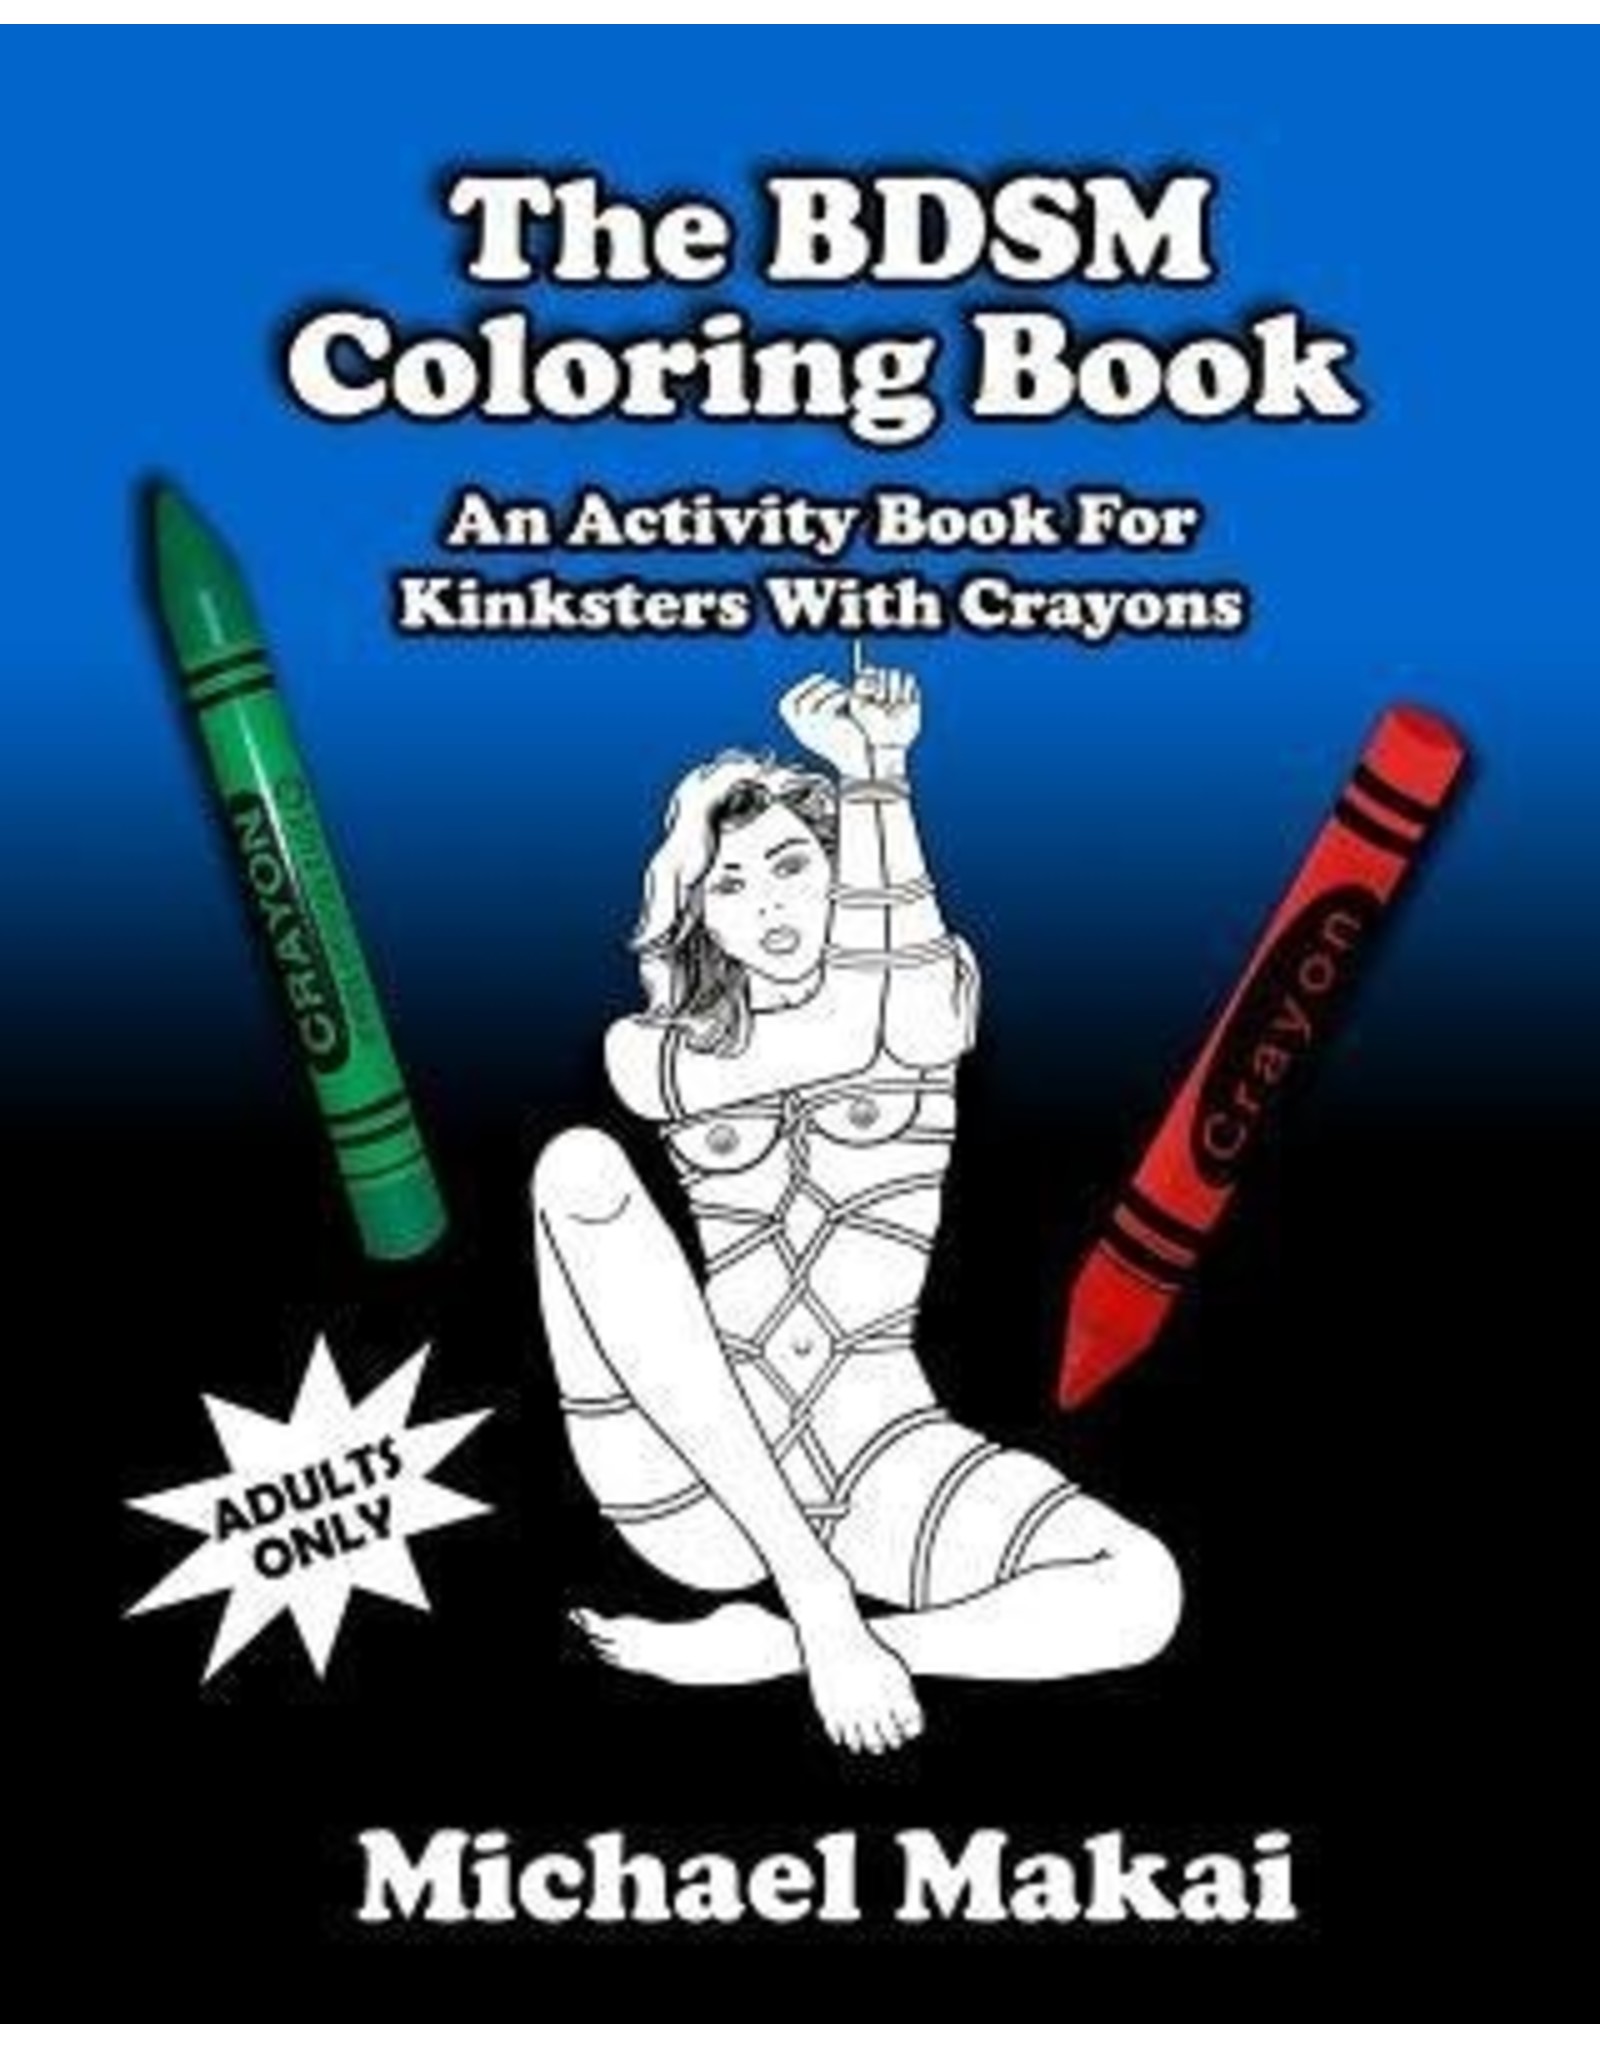 Literature The BDSM Coloring Book: An Activity Book for Kinksters With Crayons